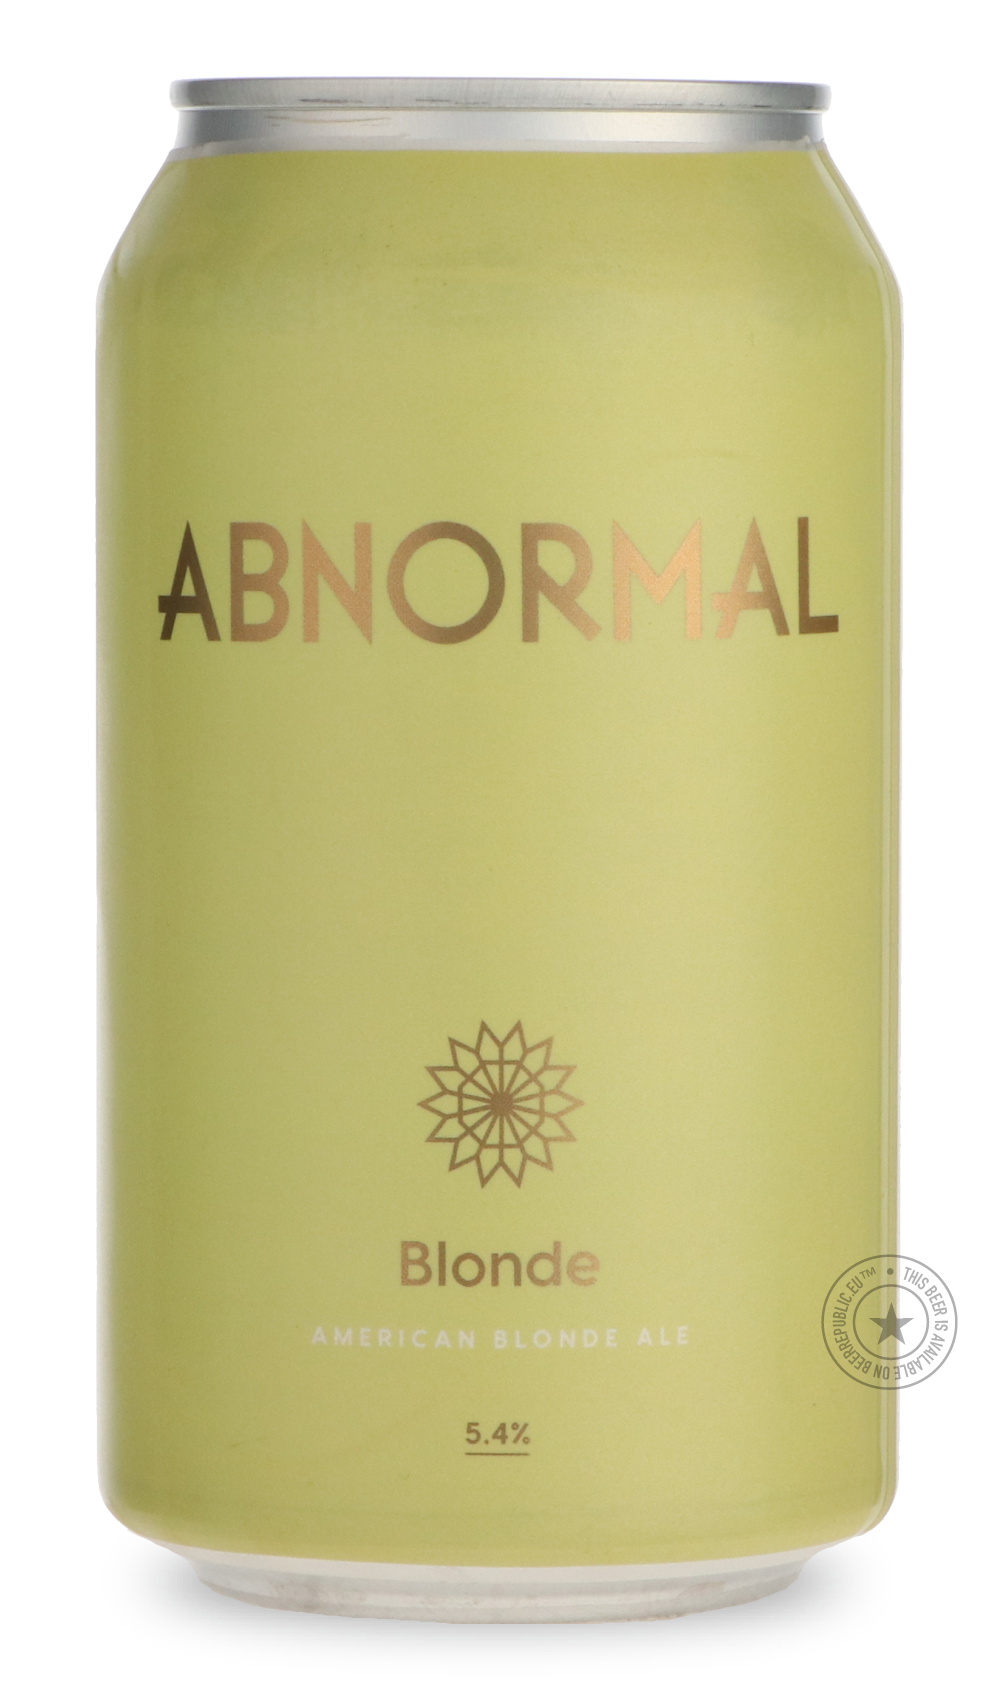 -Abnormal- Blonde-Pale- Only @ Beer Republic - The best online beer store for American & Canadian craft beer - Buy beer online from the USA and Canada - Bier online kopen - Amerikaans bier kopen - Craft beer store - Craft beer kopen - Amerikanisch bier kaufen - Bier online kaufen - Acheter biere online - IPA - Stout - Porter - New England IPA - Hazy IPA - Imperial Stout - Barrel Aged - Barrel Aged Imperial Stout - Brown - Dark beer - Blond - Blonde - Pilsner - Lager - Wheat - Weizen - Amber - Barley Wine - 